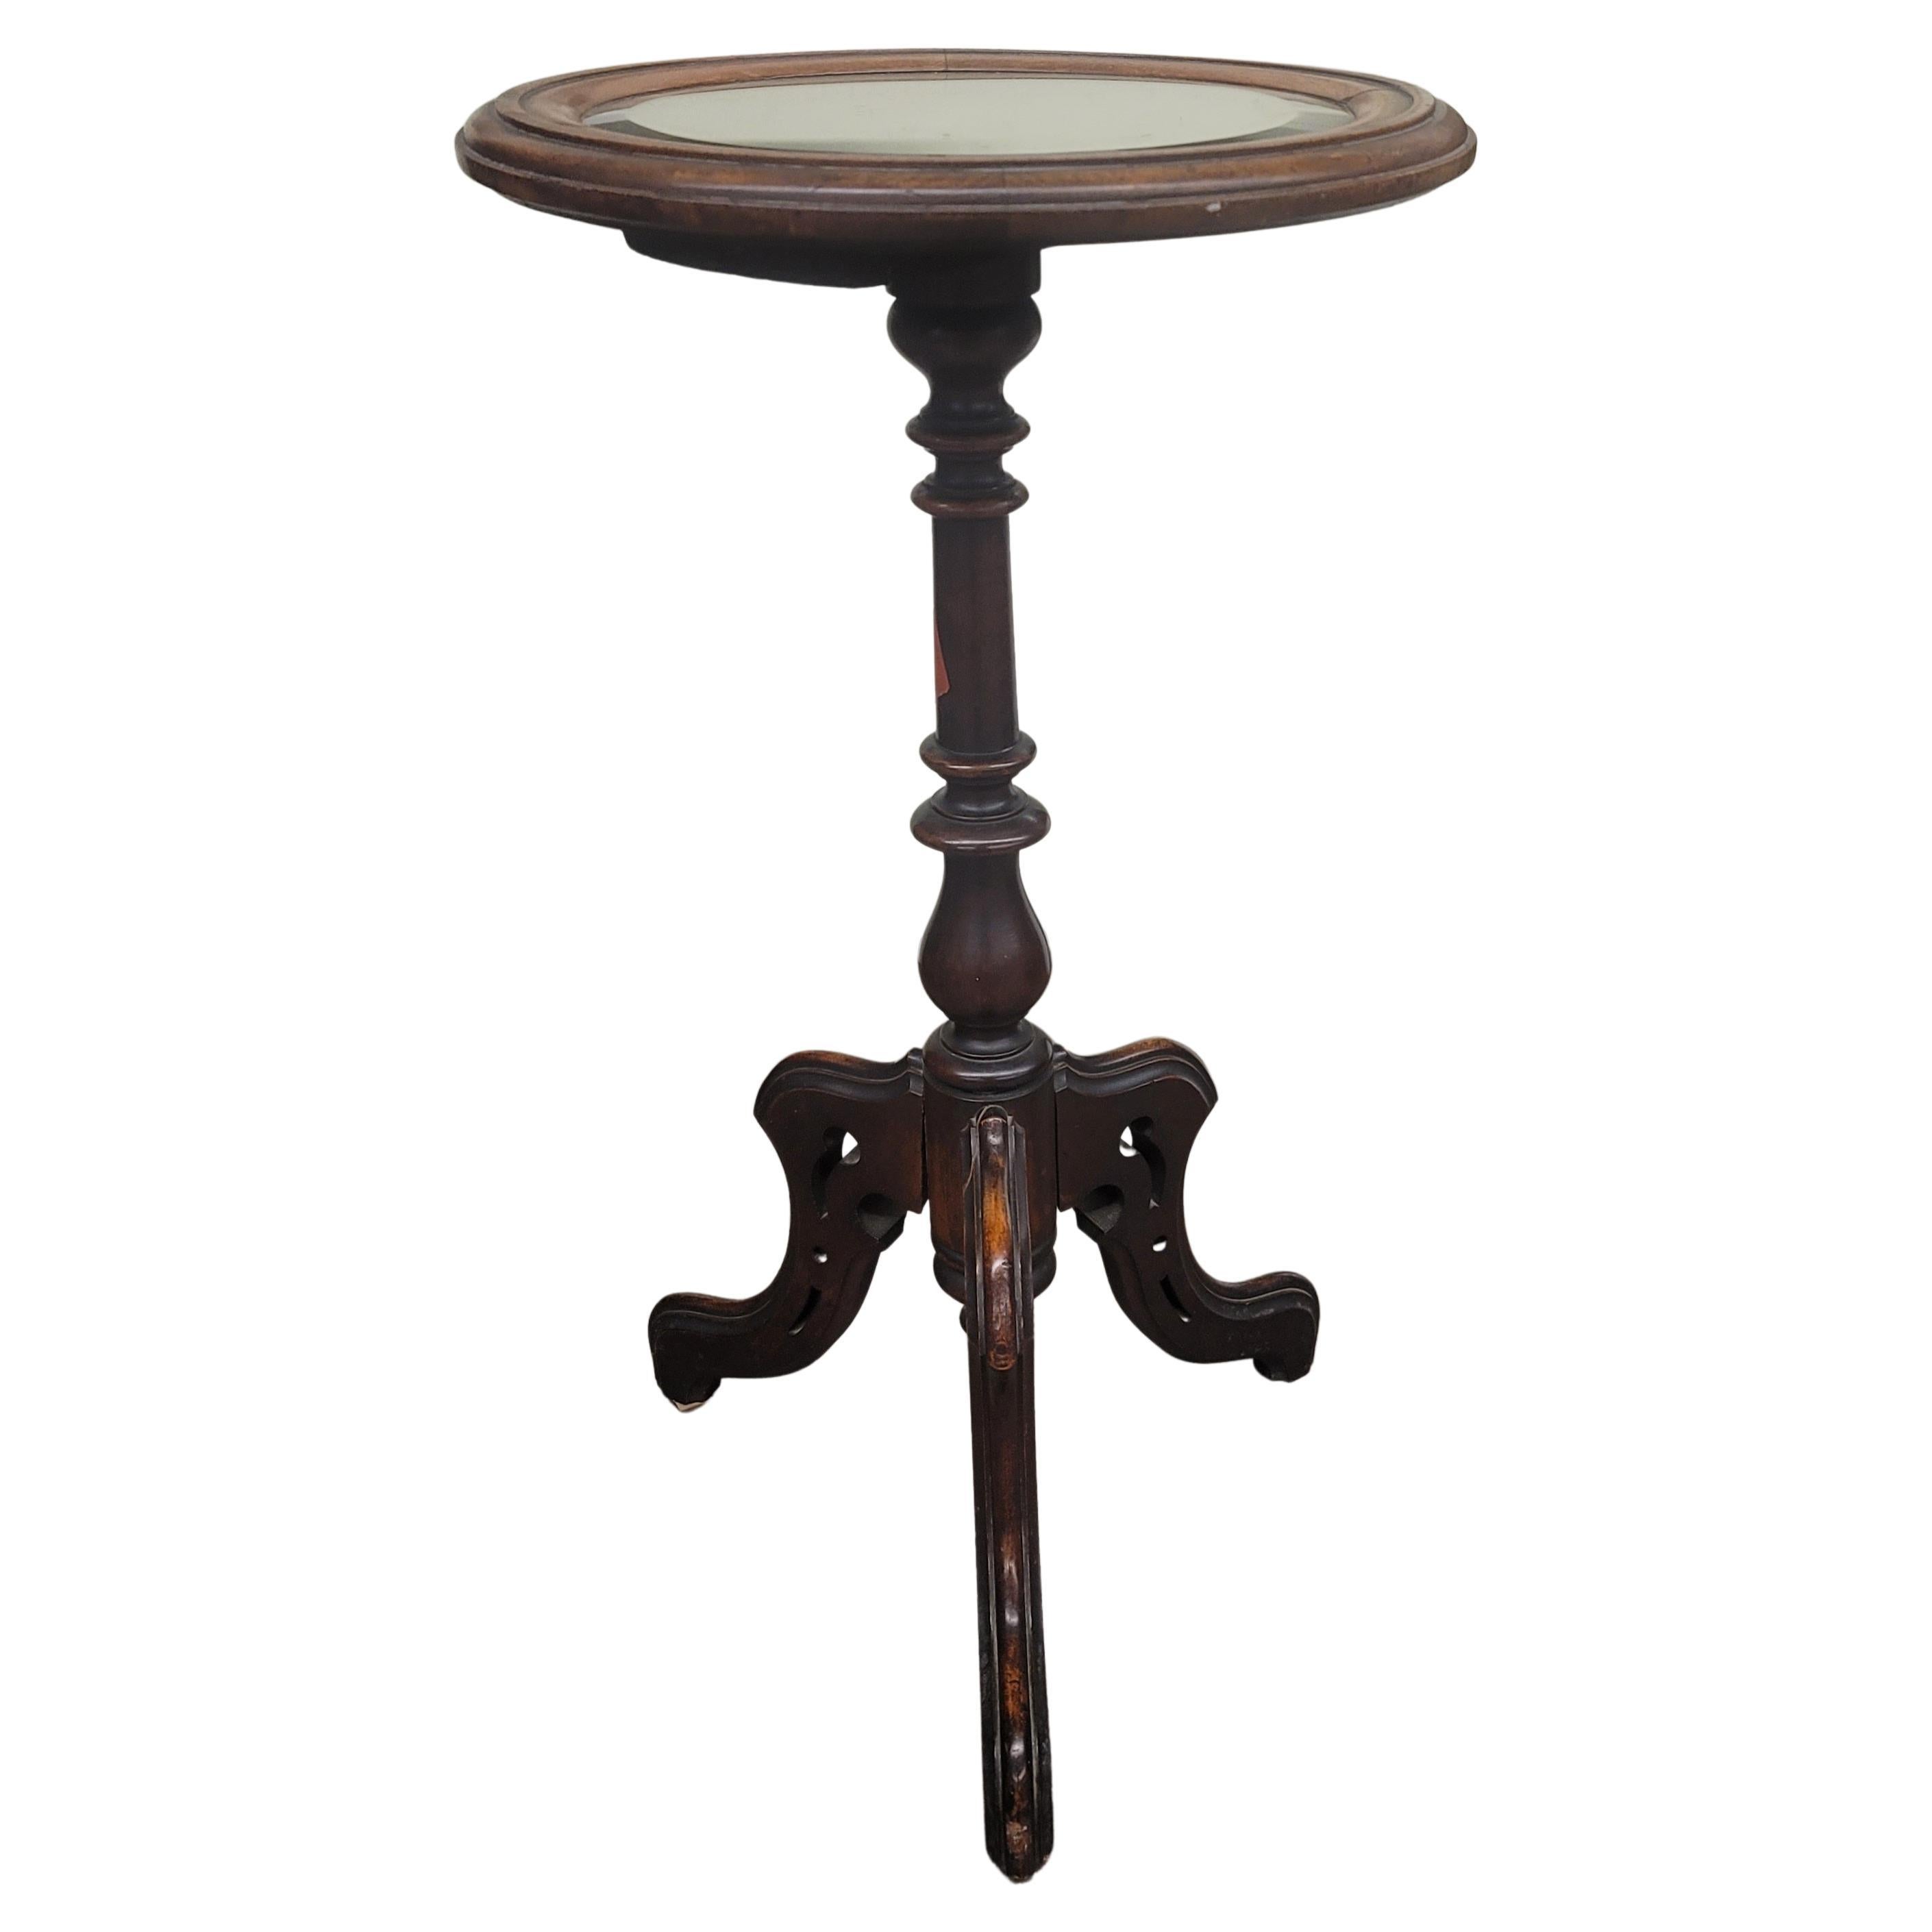 A rare Victorian Carved Mahogany mirrored stand or side table, Circa 1910s. Measures 16